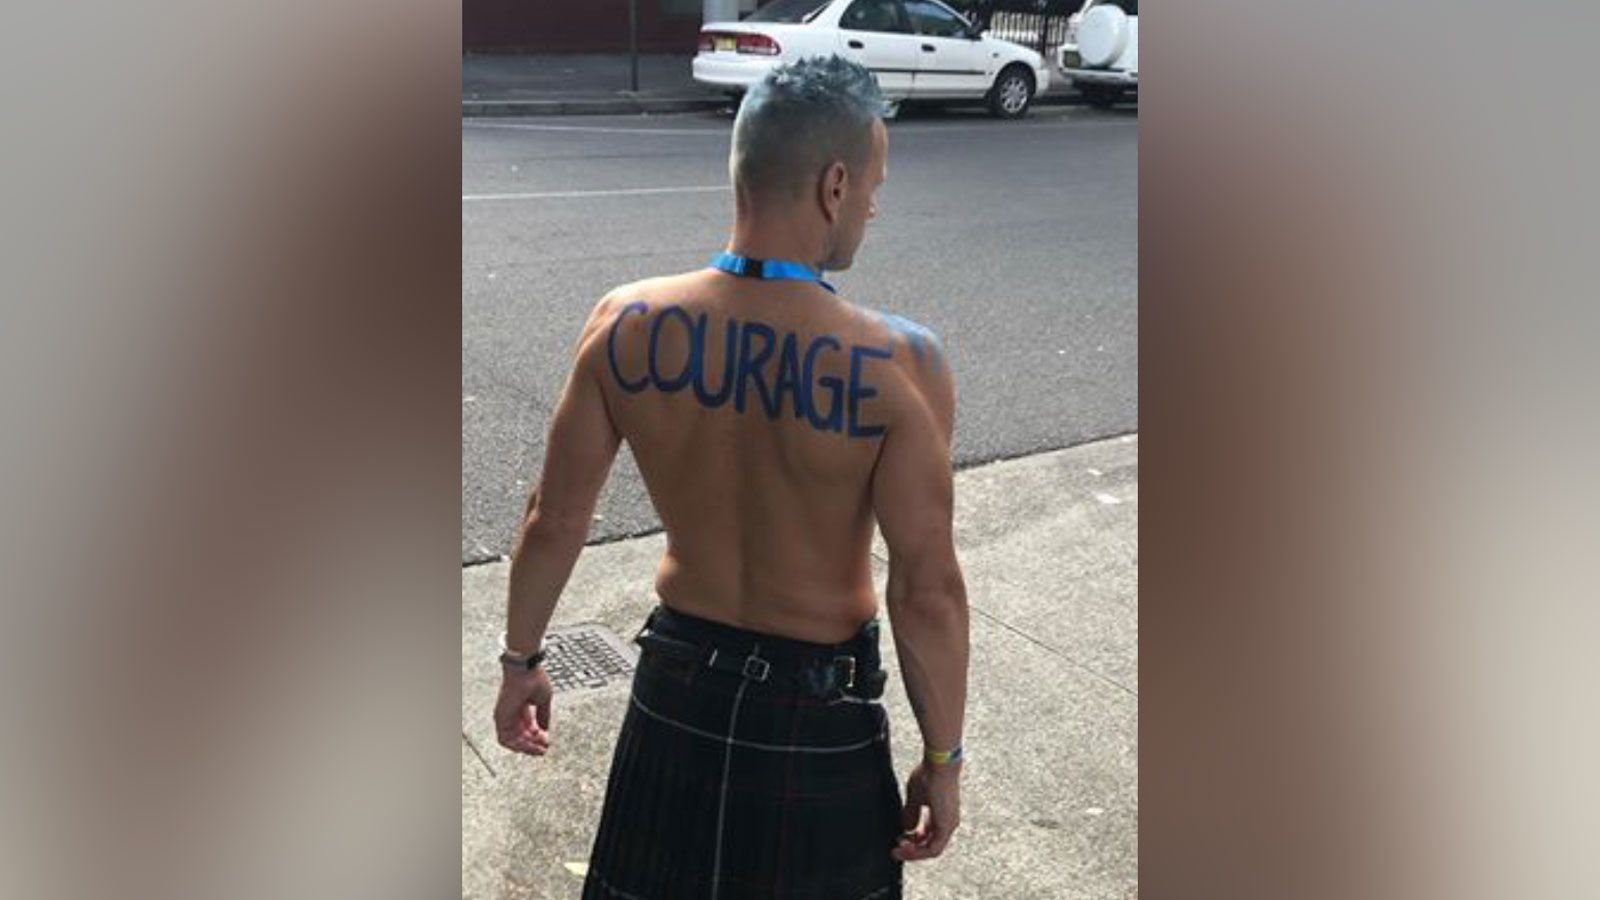 Stark with the word "courage" on his back before marching in the Sydney Gay and Lesbian Mardi Gras in March 2019. He now has the word tattooed on his back.